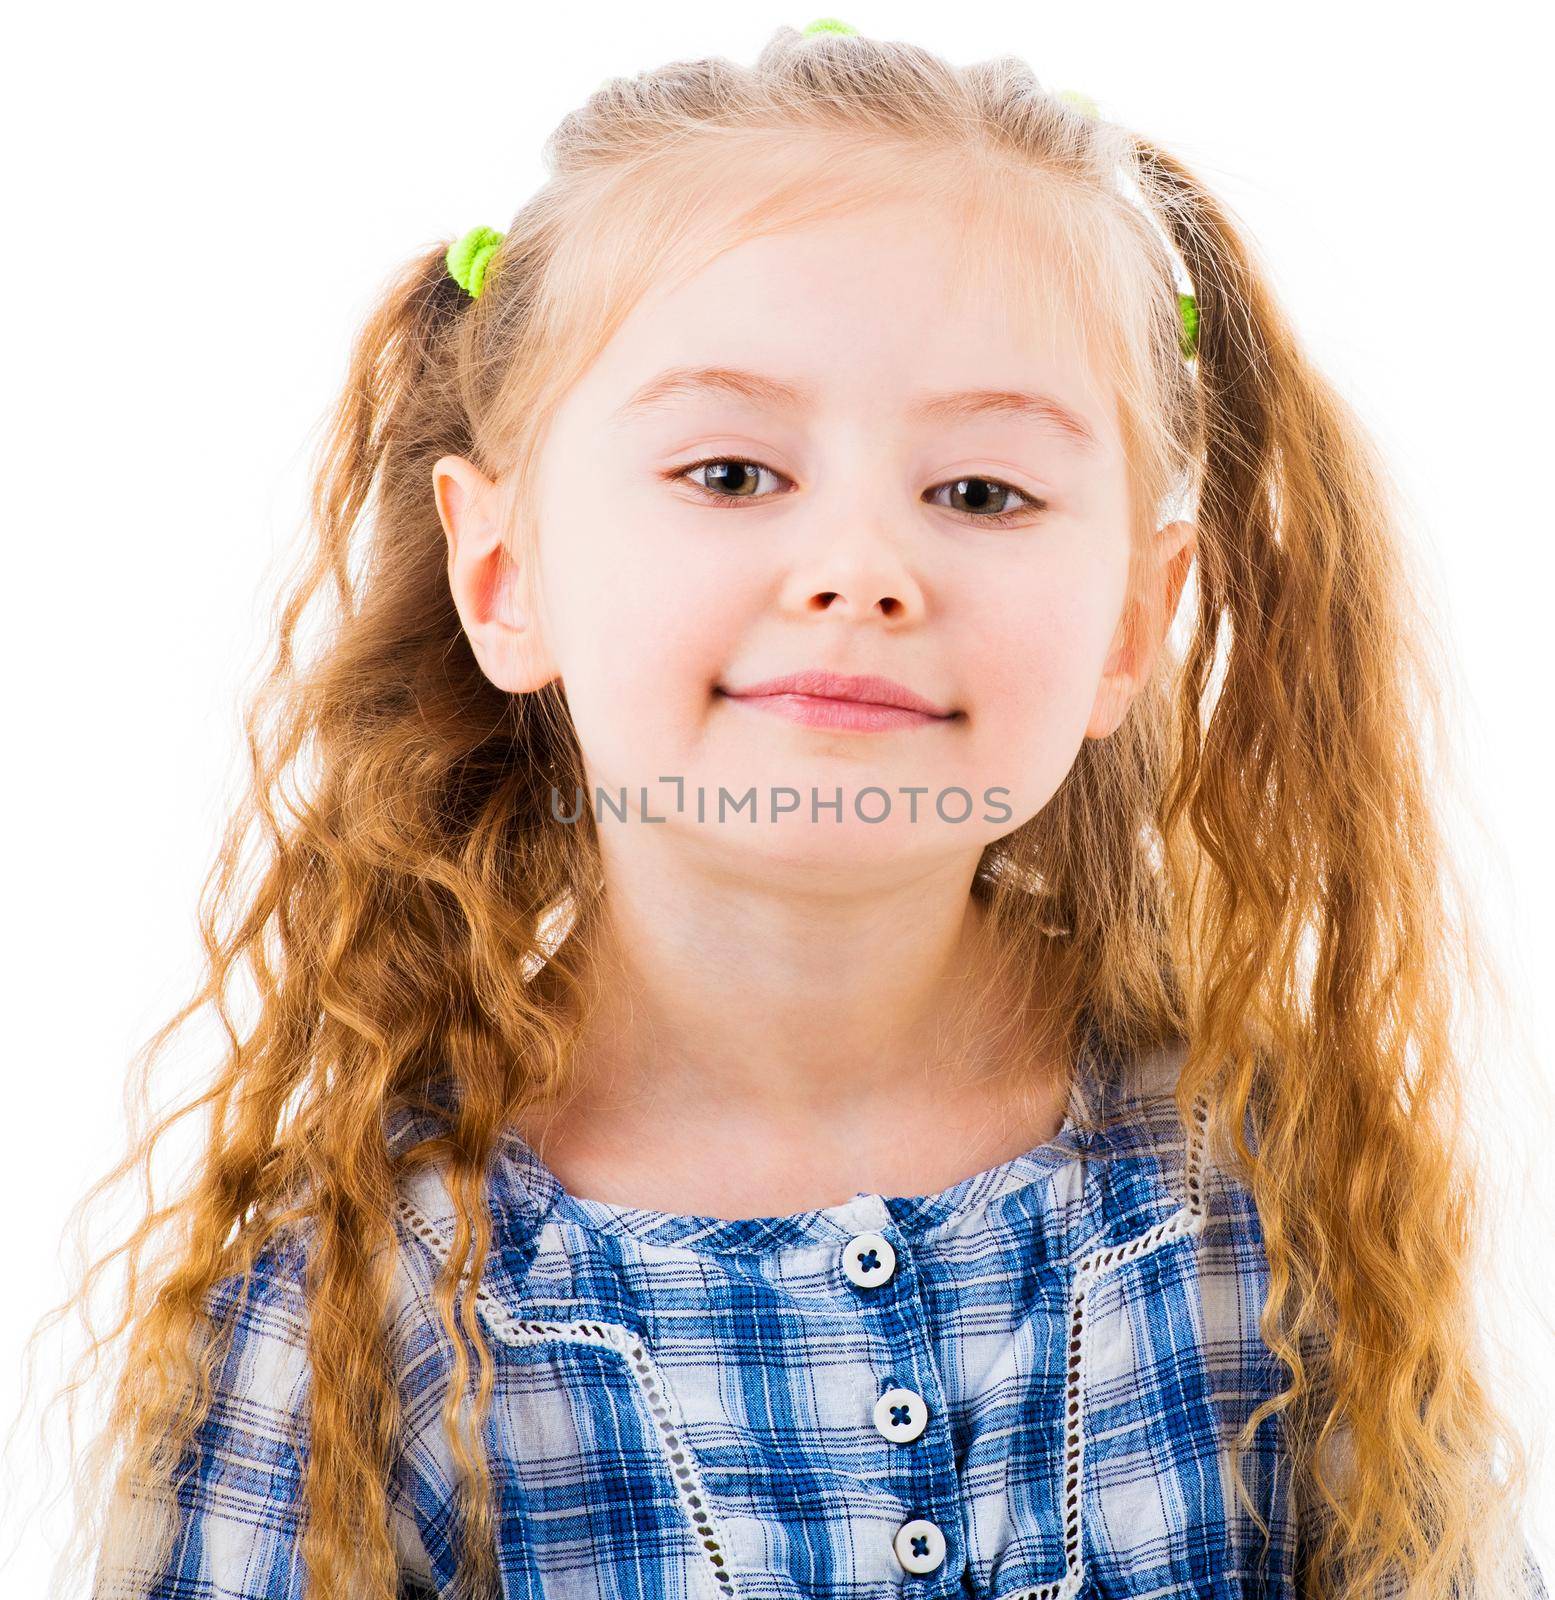 Portrait of cheerful baby girl with blonde wavy hairstyle in plaid blue blouse isolated on white background